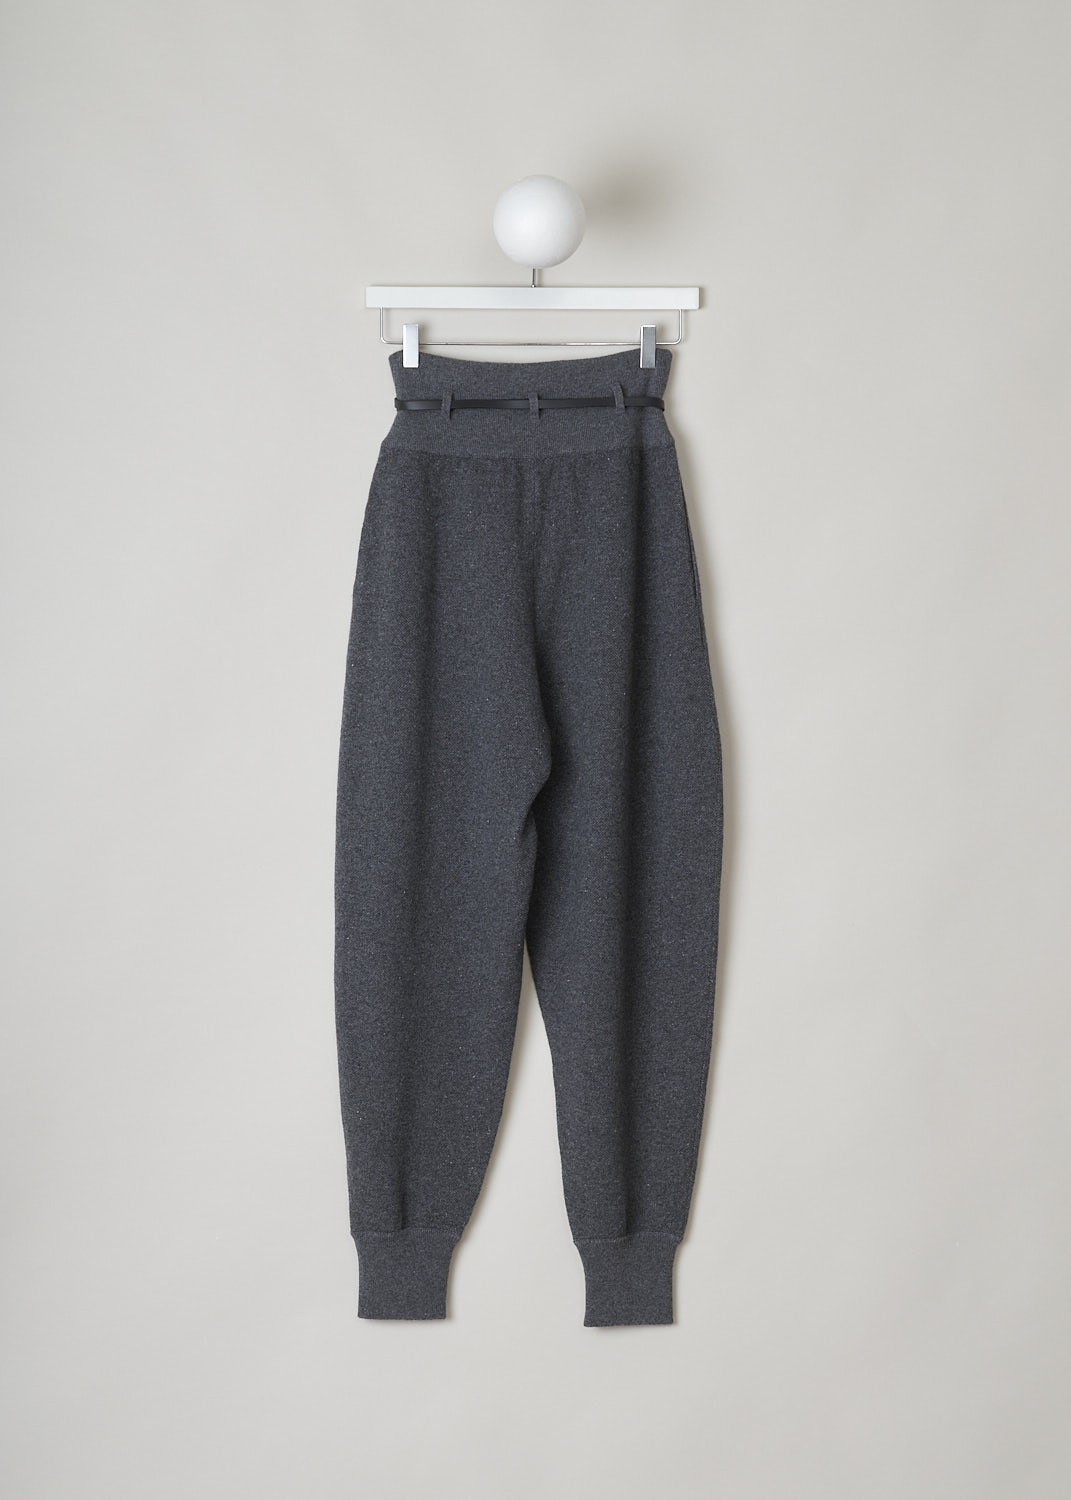 THE ROW, HEATHER GREY PANTS WITH LEATHER BELT, DADO_PANT_5765F377_GREY_MELANGE, Grey, Back, These heather grey cashmere-blend pants are high-waisted. The broad elasticated waistband has a ribbed finish. These pants come with a narrow leather belt with a silver-tone D-ring. The balloon pants legs have front pleats, concealed slanted pockets and elasticated ankle cuffs.
